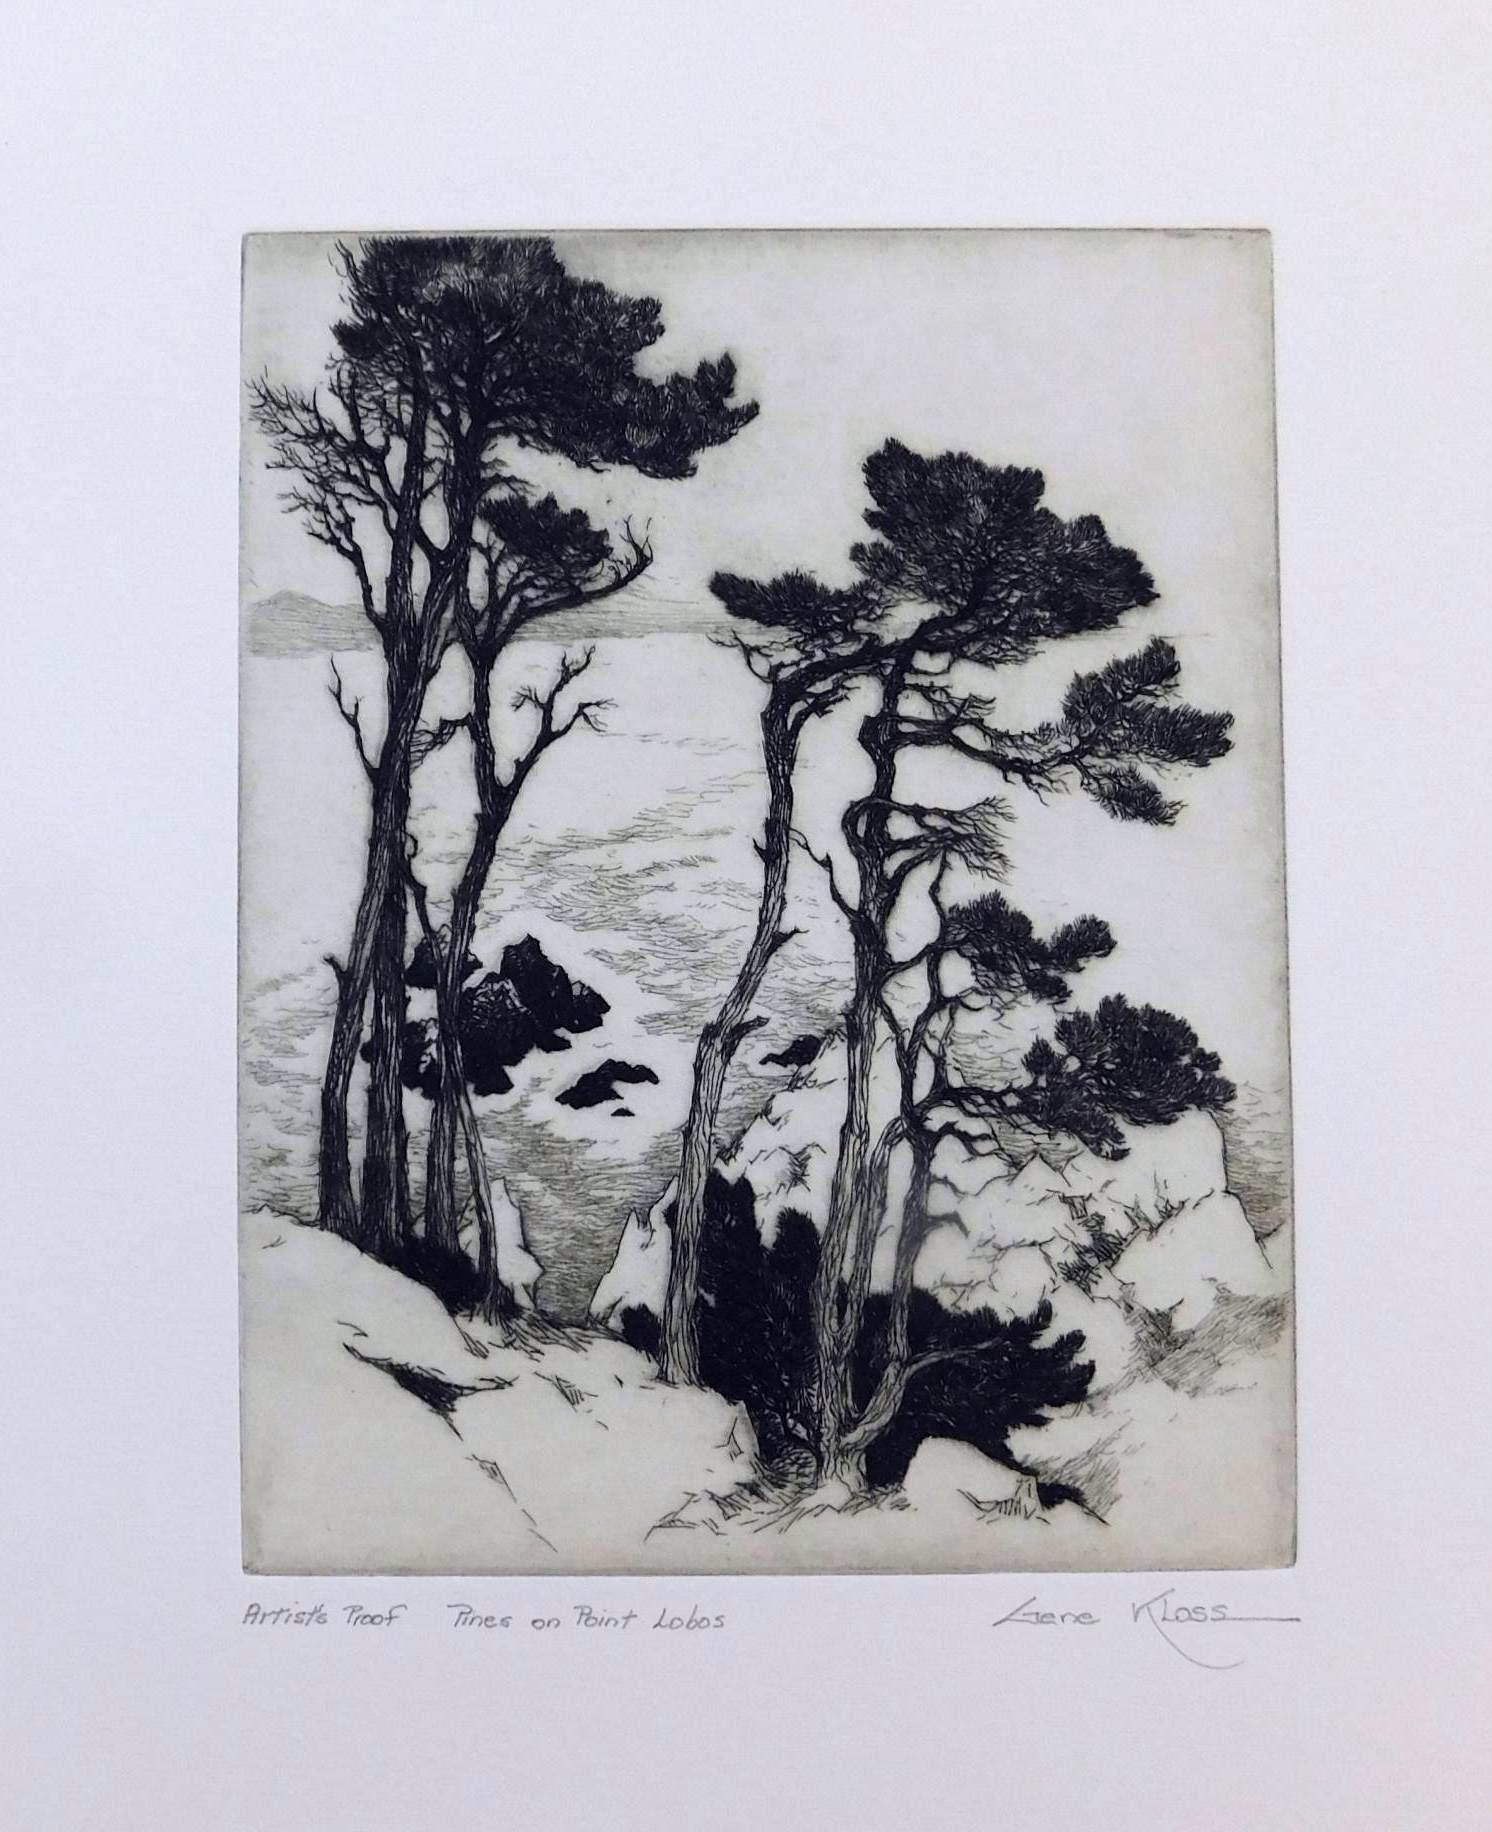 Gene Kloss Original Etching, 1938 - "Pines at Point Lobos"   For Sale